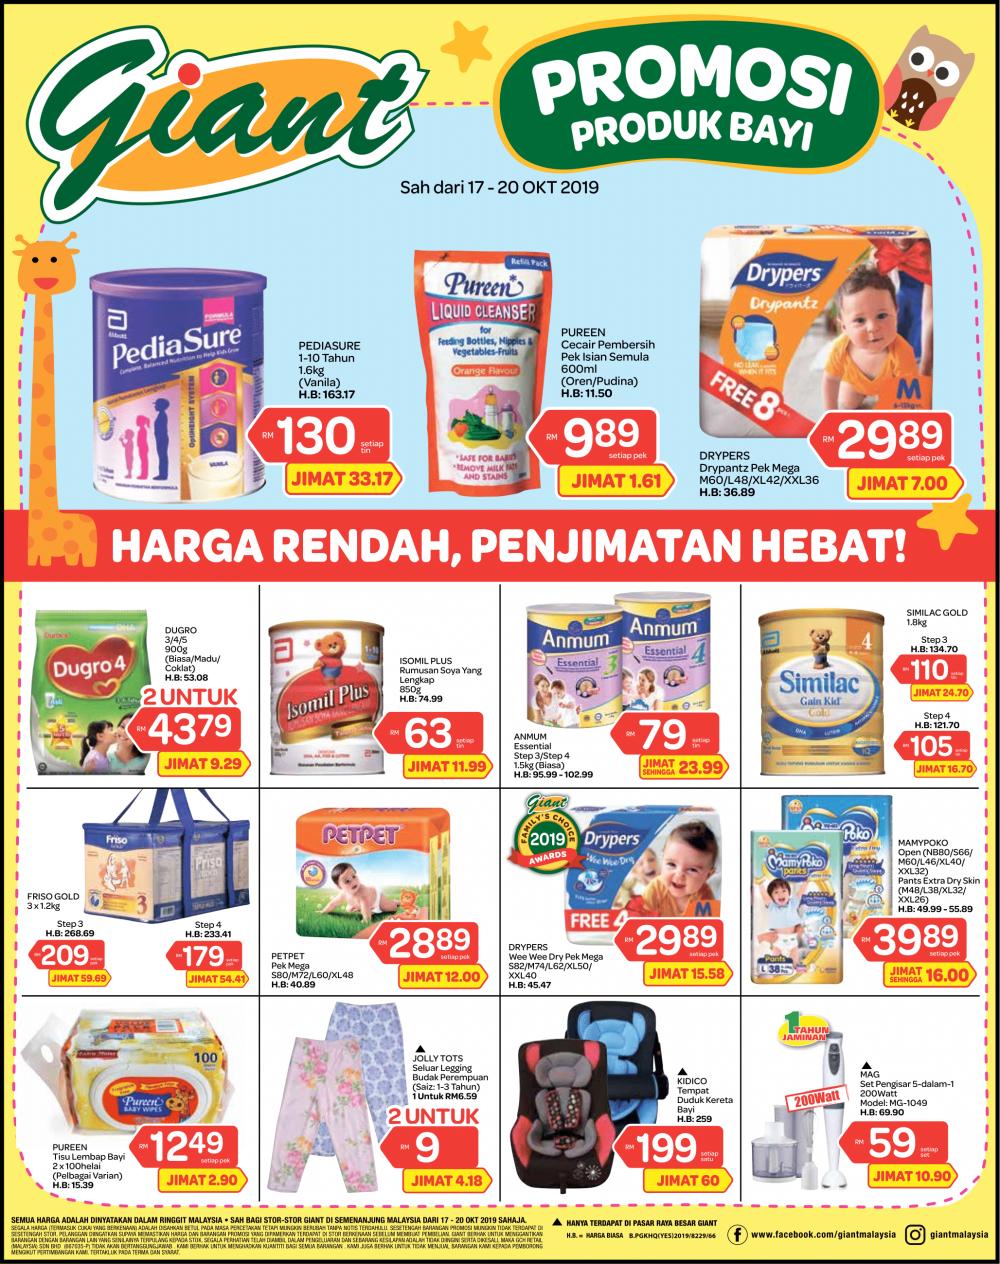 Giant Baby Products Promotion (17 October 2019 - 20 October 2019)